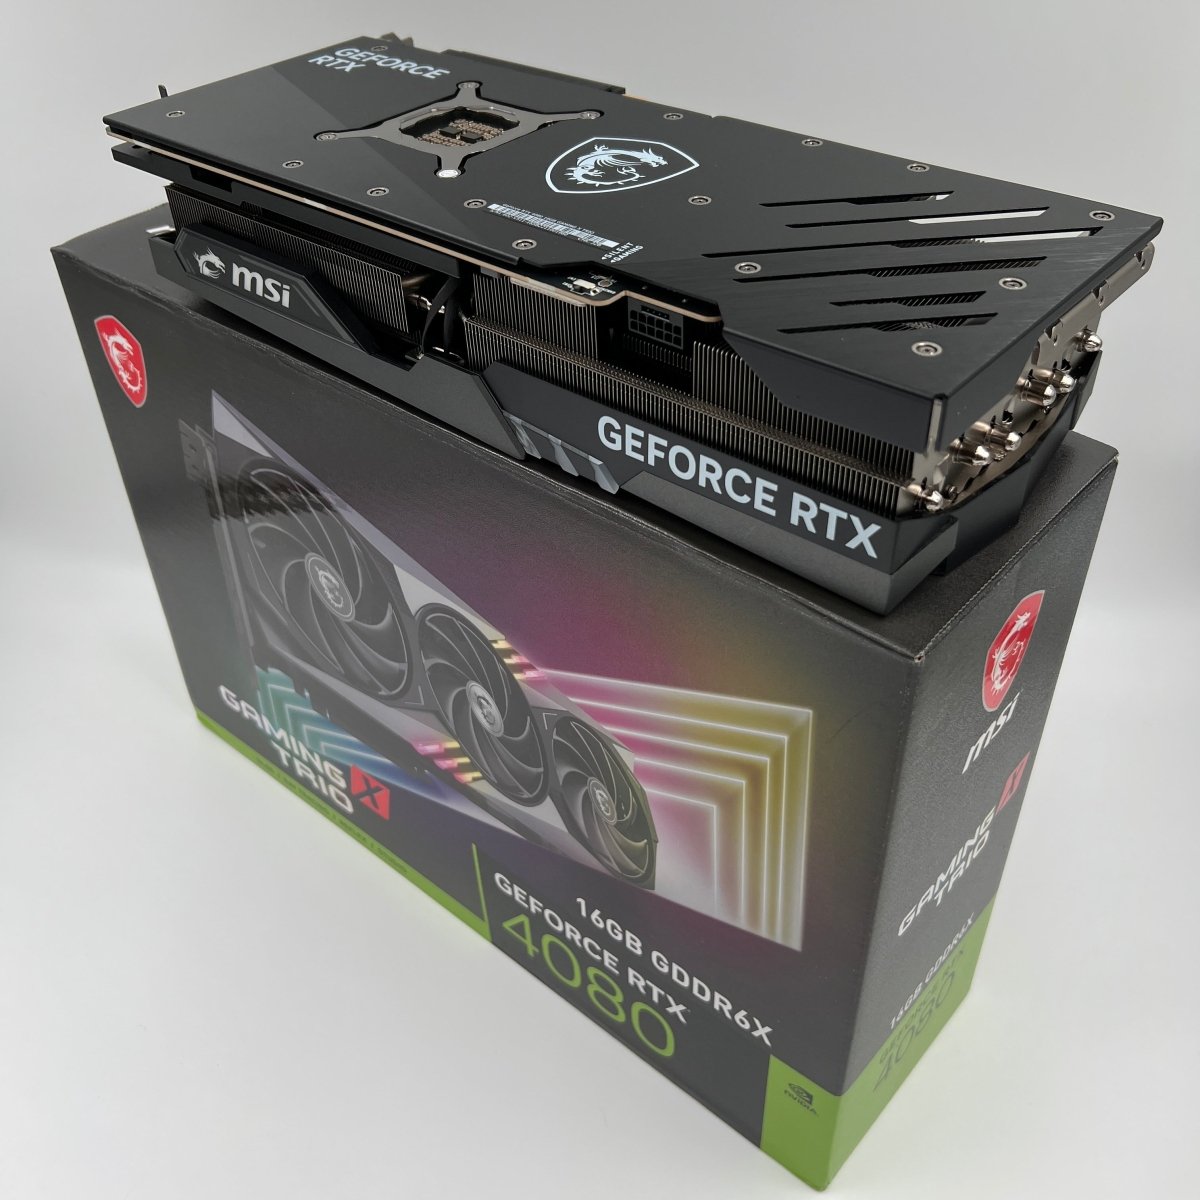 MSI GeForce RTX 4080 Gaming X Trio Review